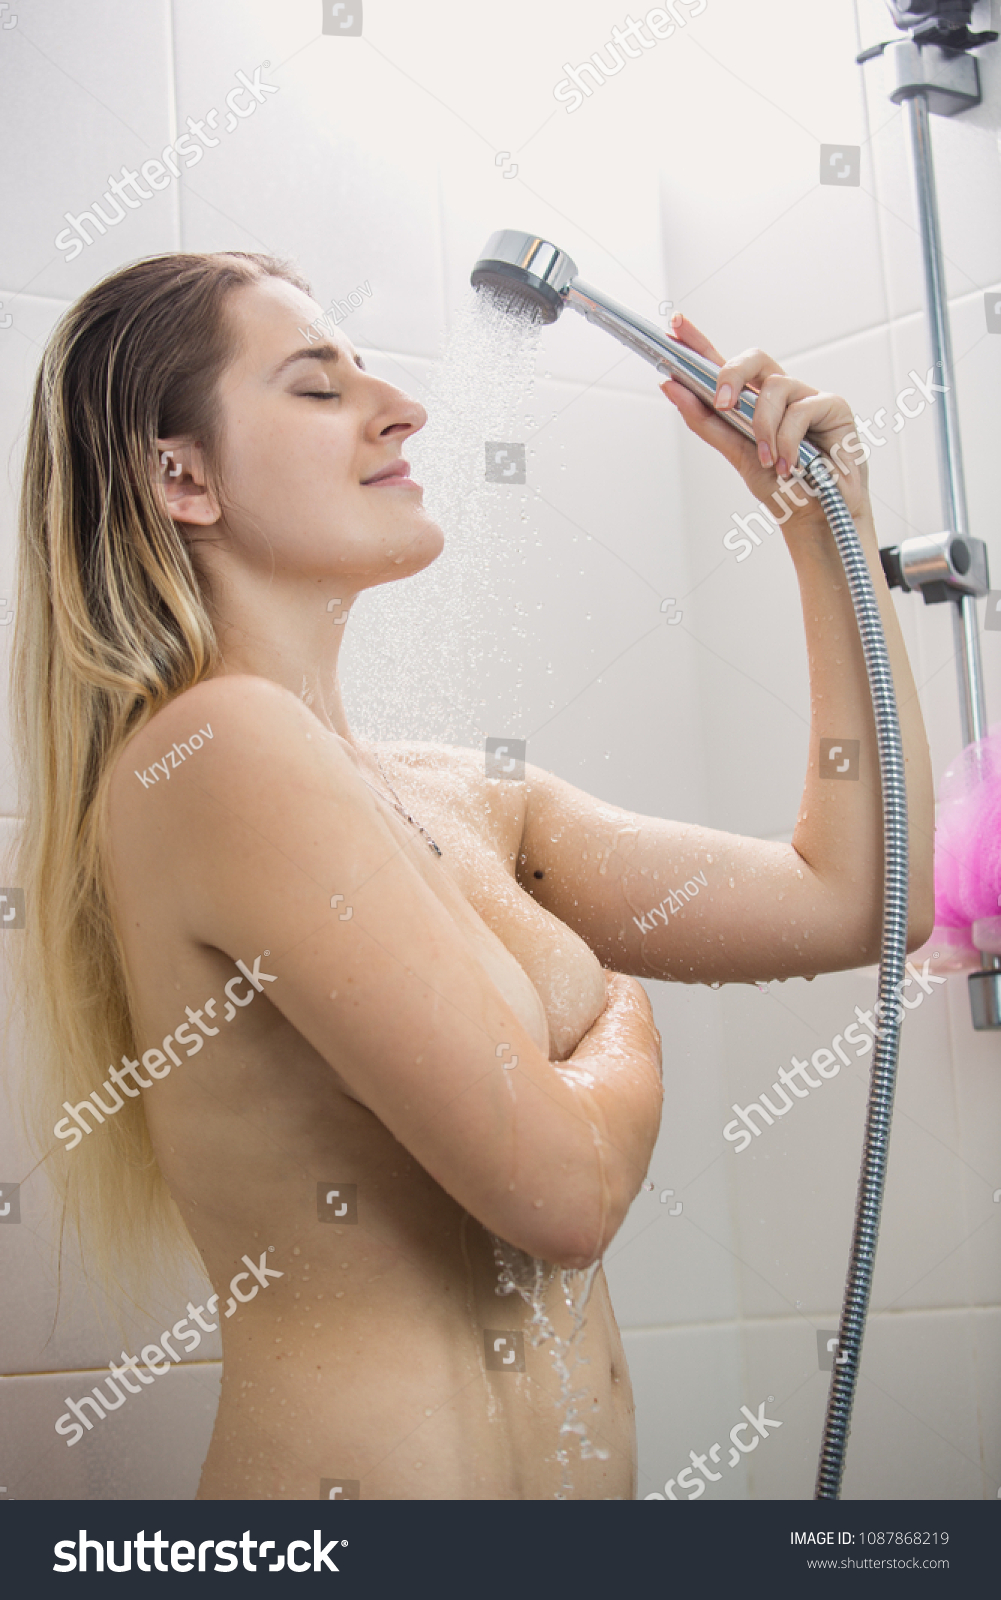 Pictures Of Naked Women In The Shower cherry pic